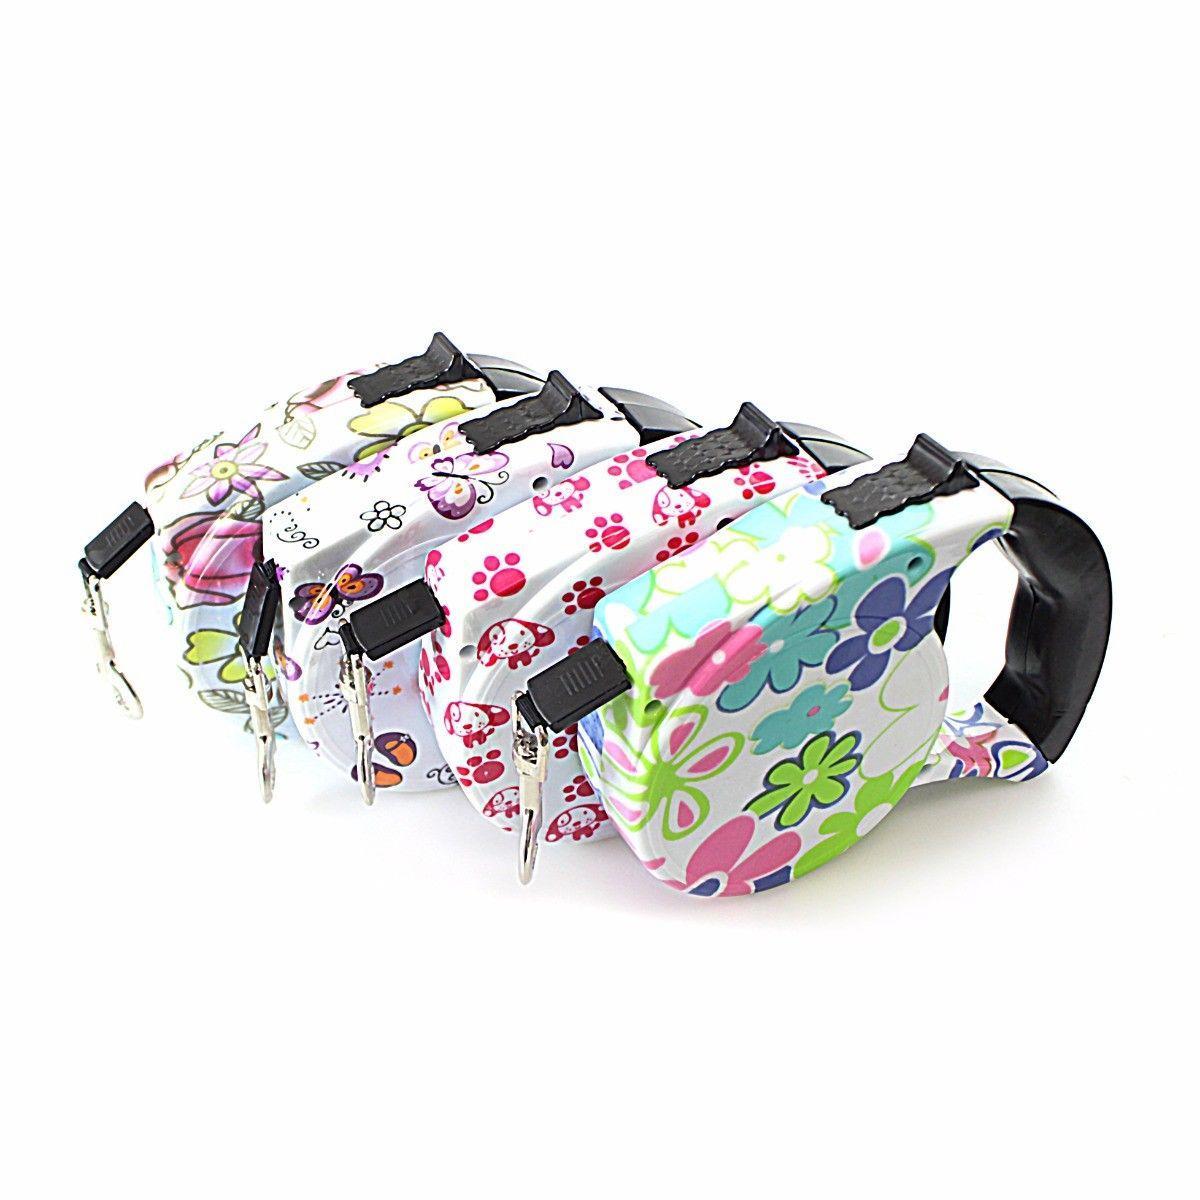 Retractable Dog Lead with Comfortable Grip 16.5 cm / 5 m Assorted Designs 0053 (Parcel Rate)